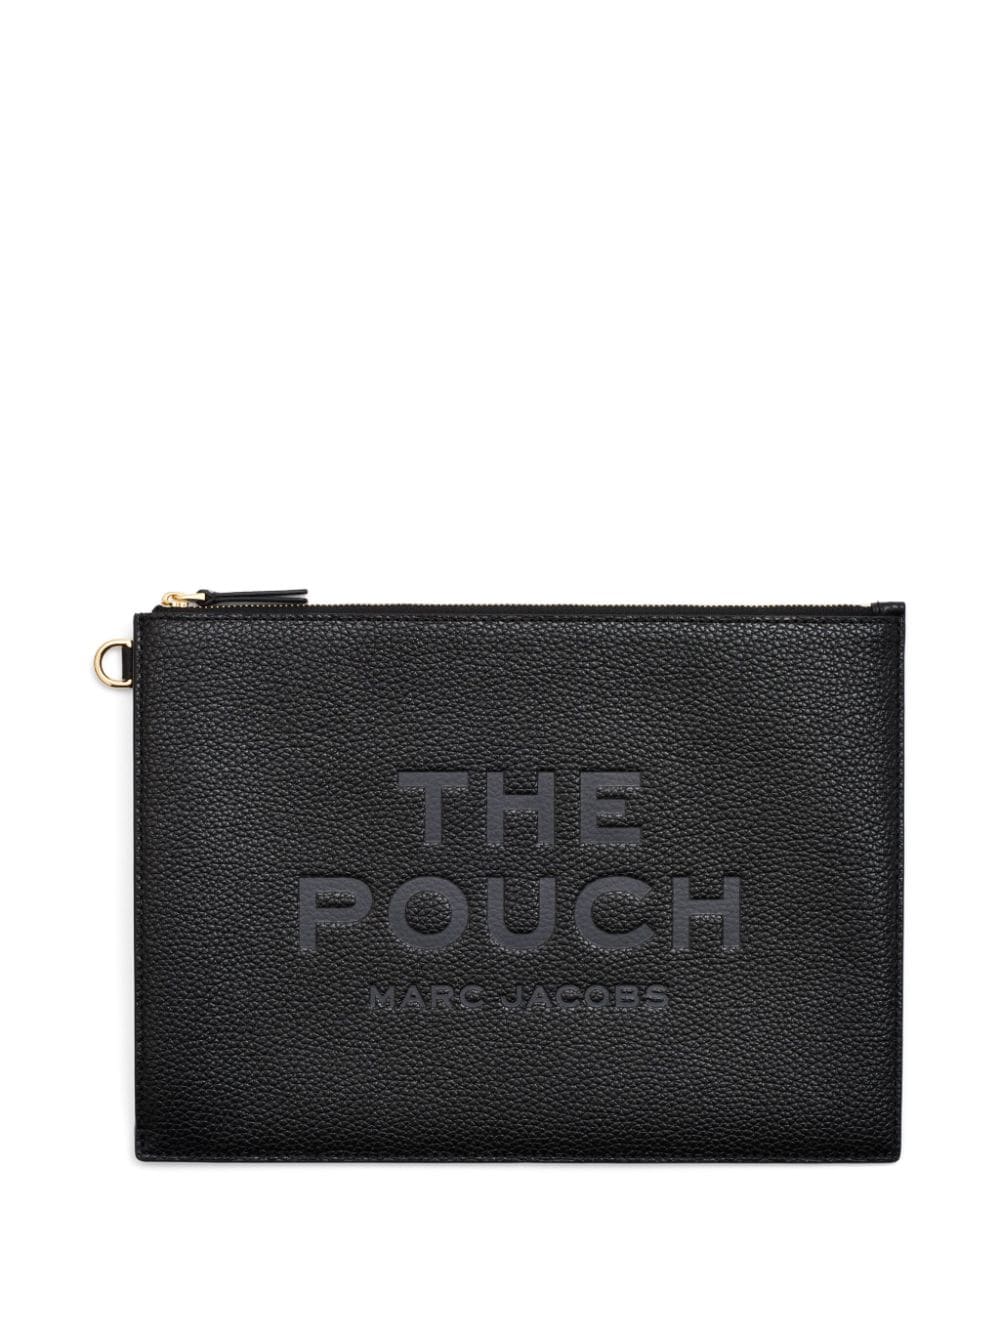 POUCH THE LARGE NEGRO LOGO...